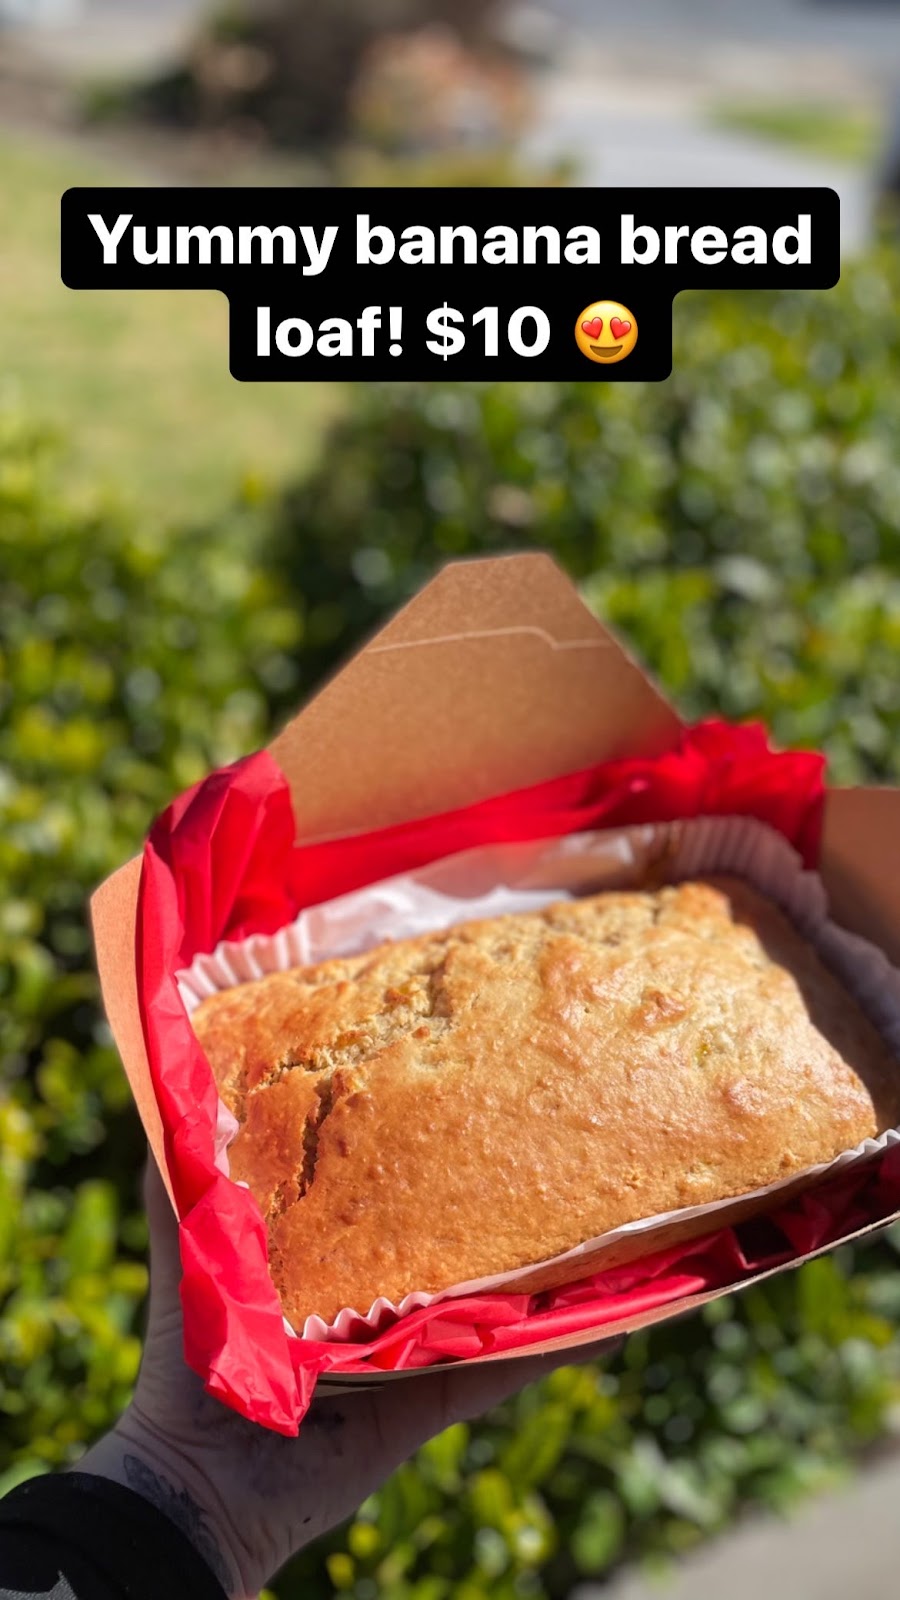 Nats Baked Goods | bakery | Oaks Rd, Thirlmere NSW 2572, Australia | 0404302285 OR +61 404 302 285